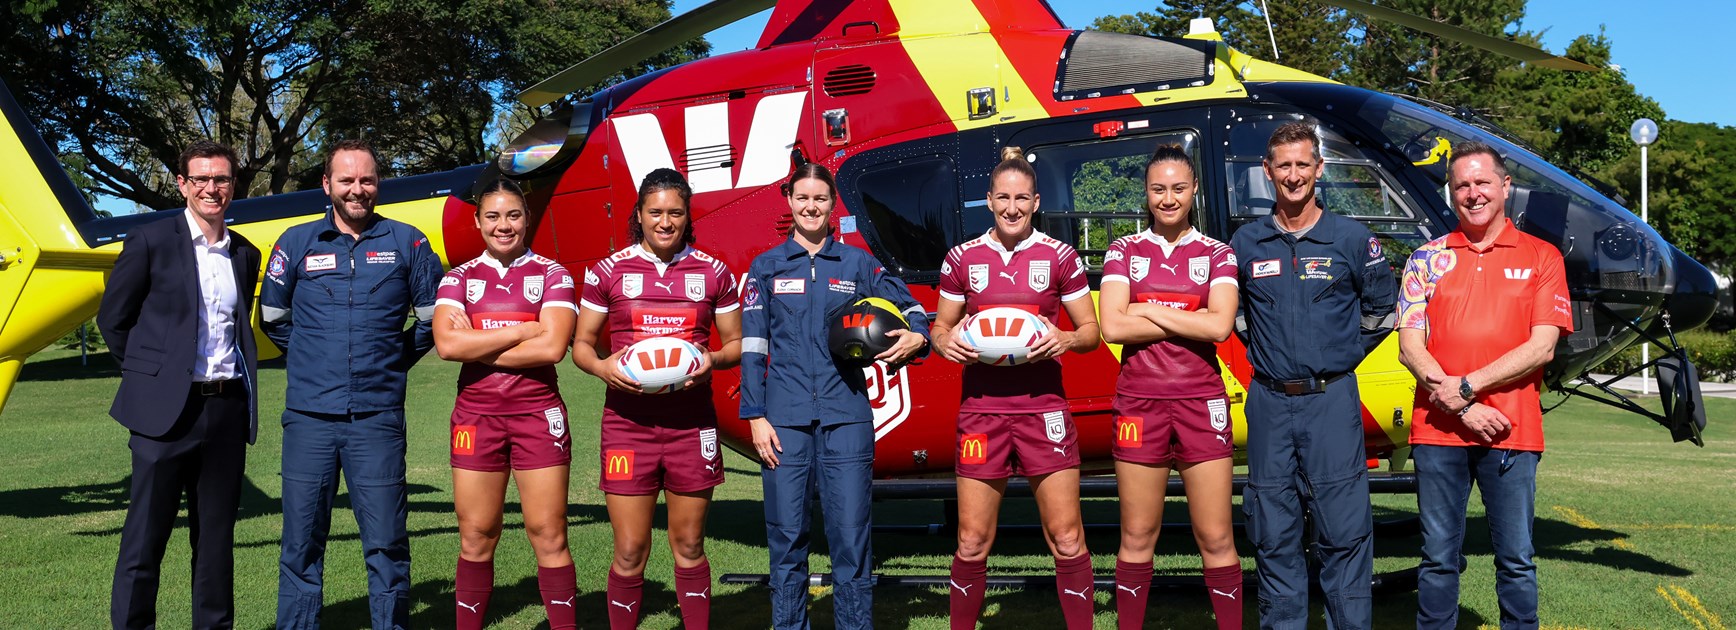 Maroons given extra incentive to score big thanks to Westpac partnership